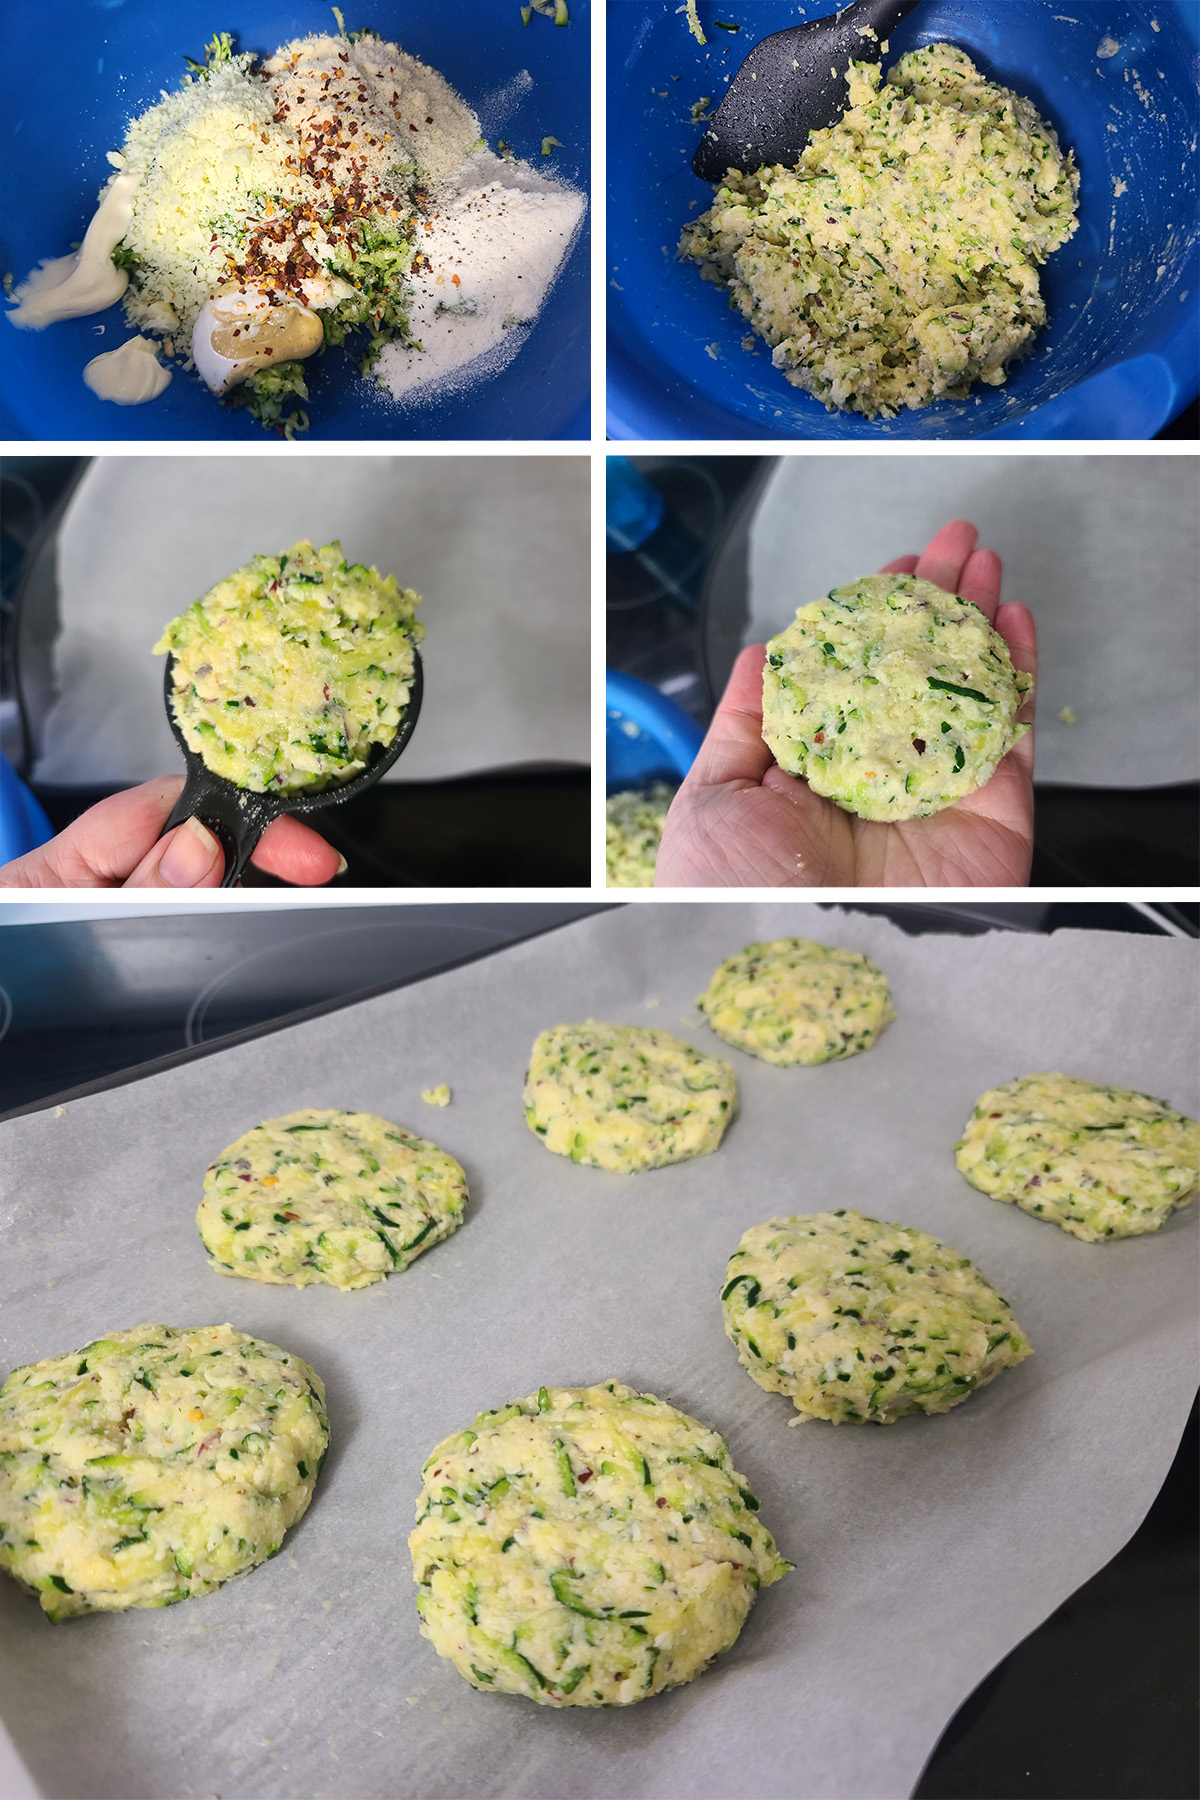 A 5 part image showing the zucchini batter being made and formed into patties.